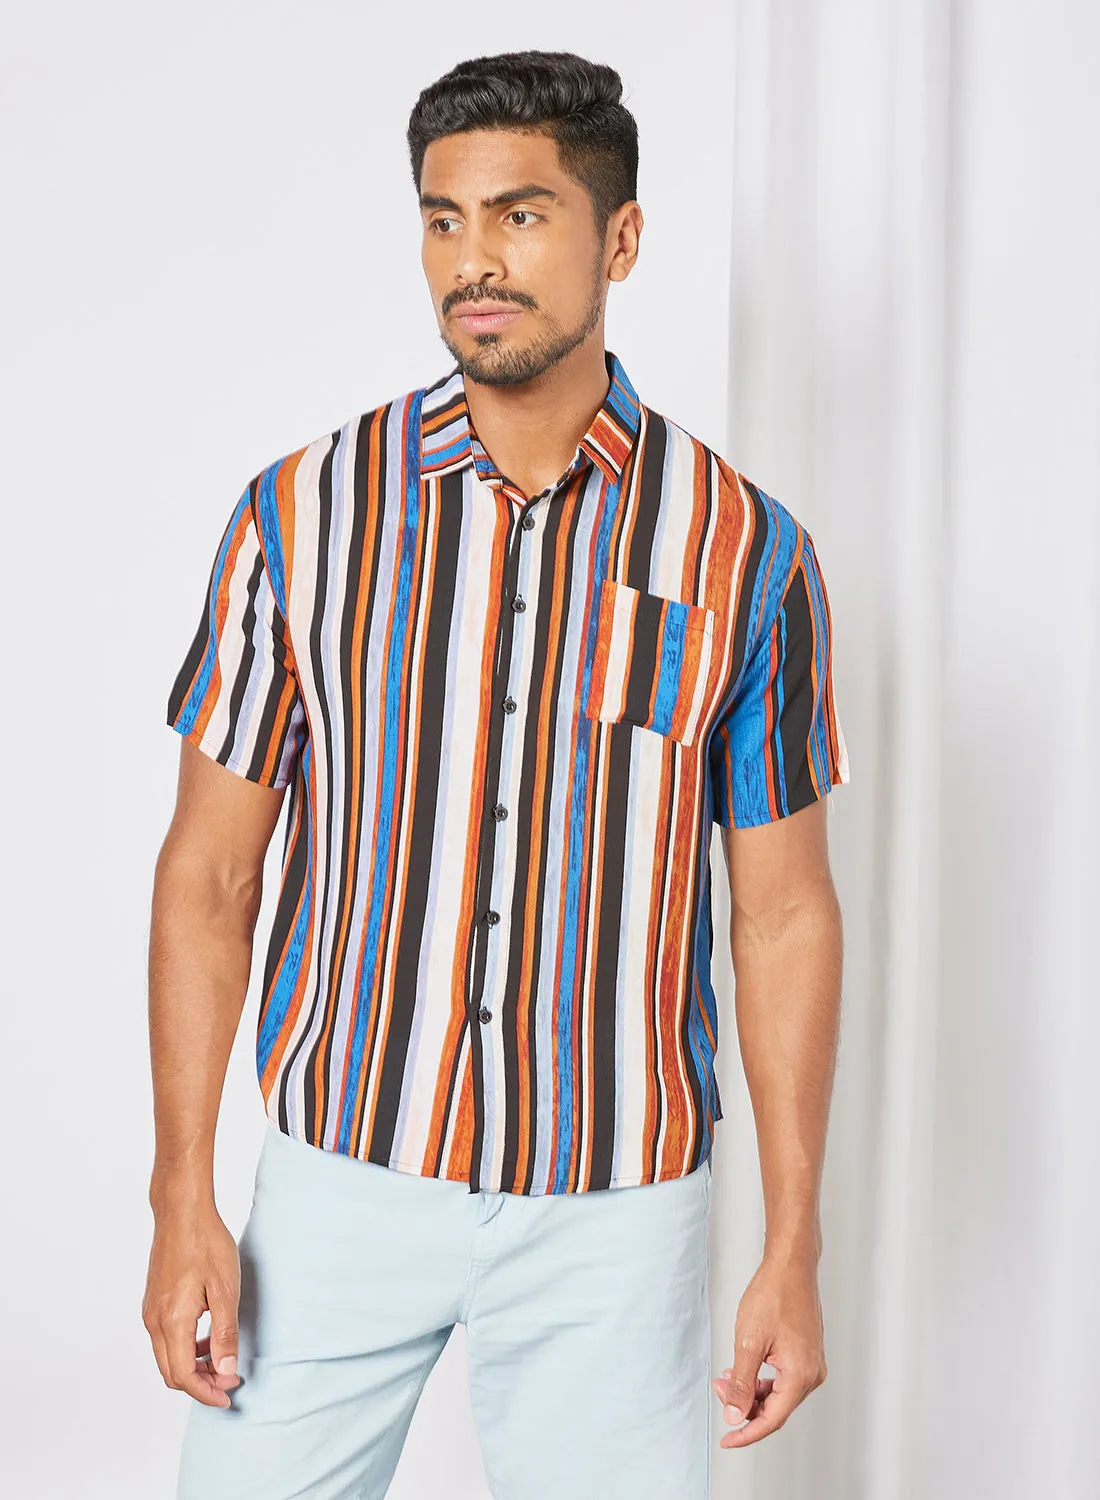 QUWA Casual Stripes Short Sleeves Woven Shirt with Pocket Blue/Brown Stripe/White